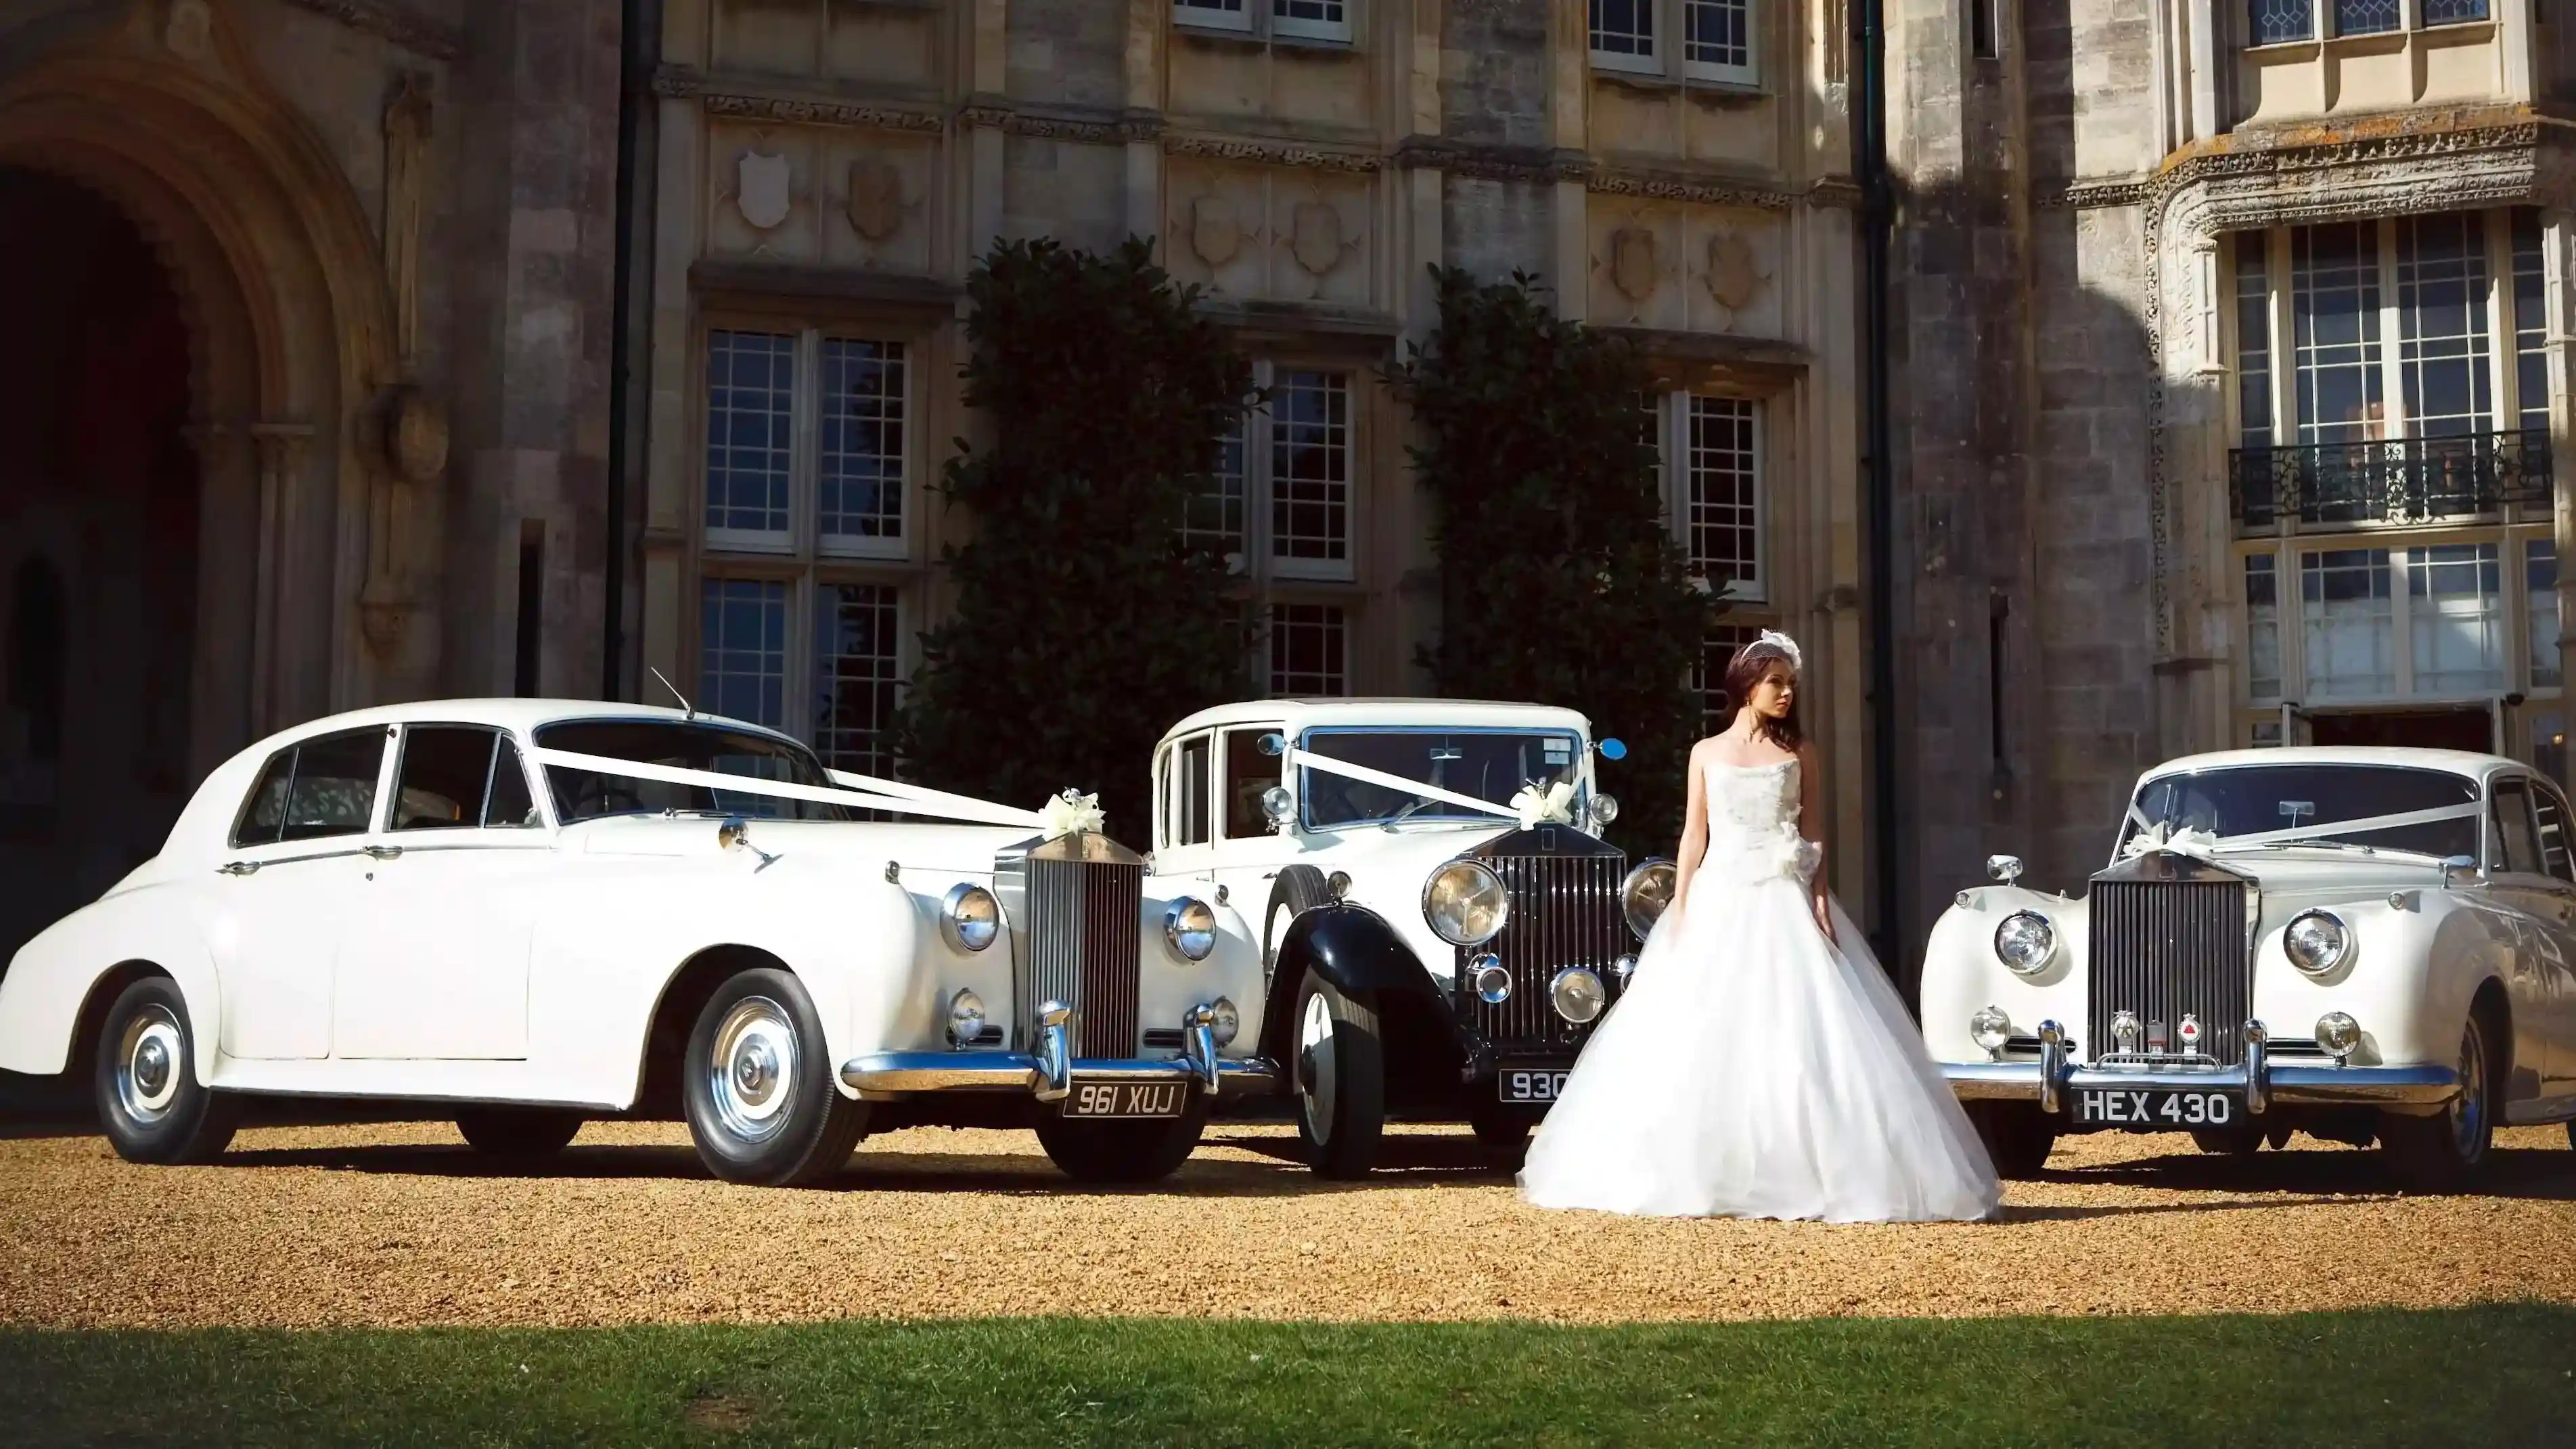 Selection of three Classic and Vintage Wedding Cars in White decorated with matching white ribbons and Bride wearing a white wedding dress standing in front of the vehicles.